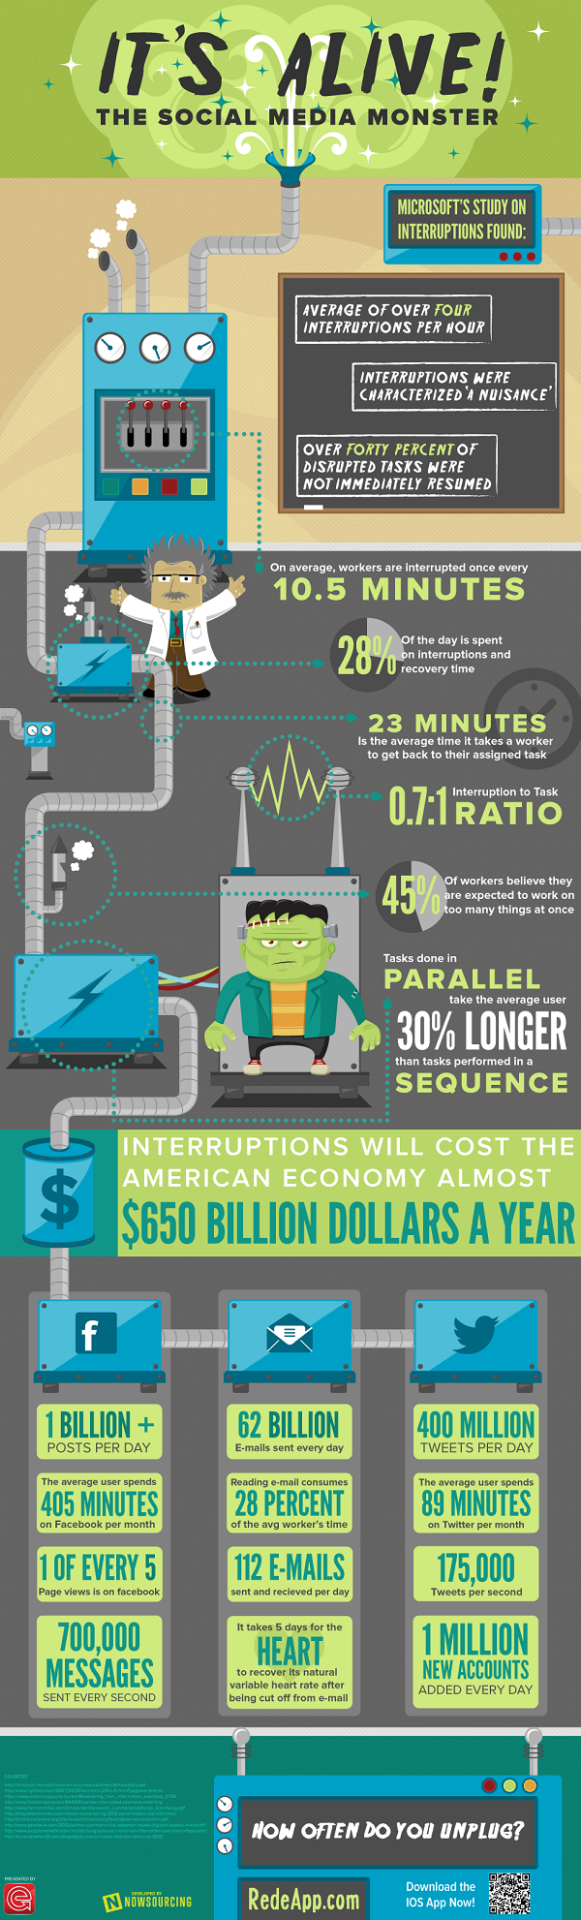 Social Media Will Distract You At Work [Infographic] The Blog Herald